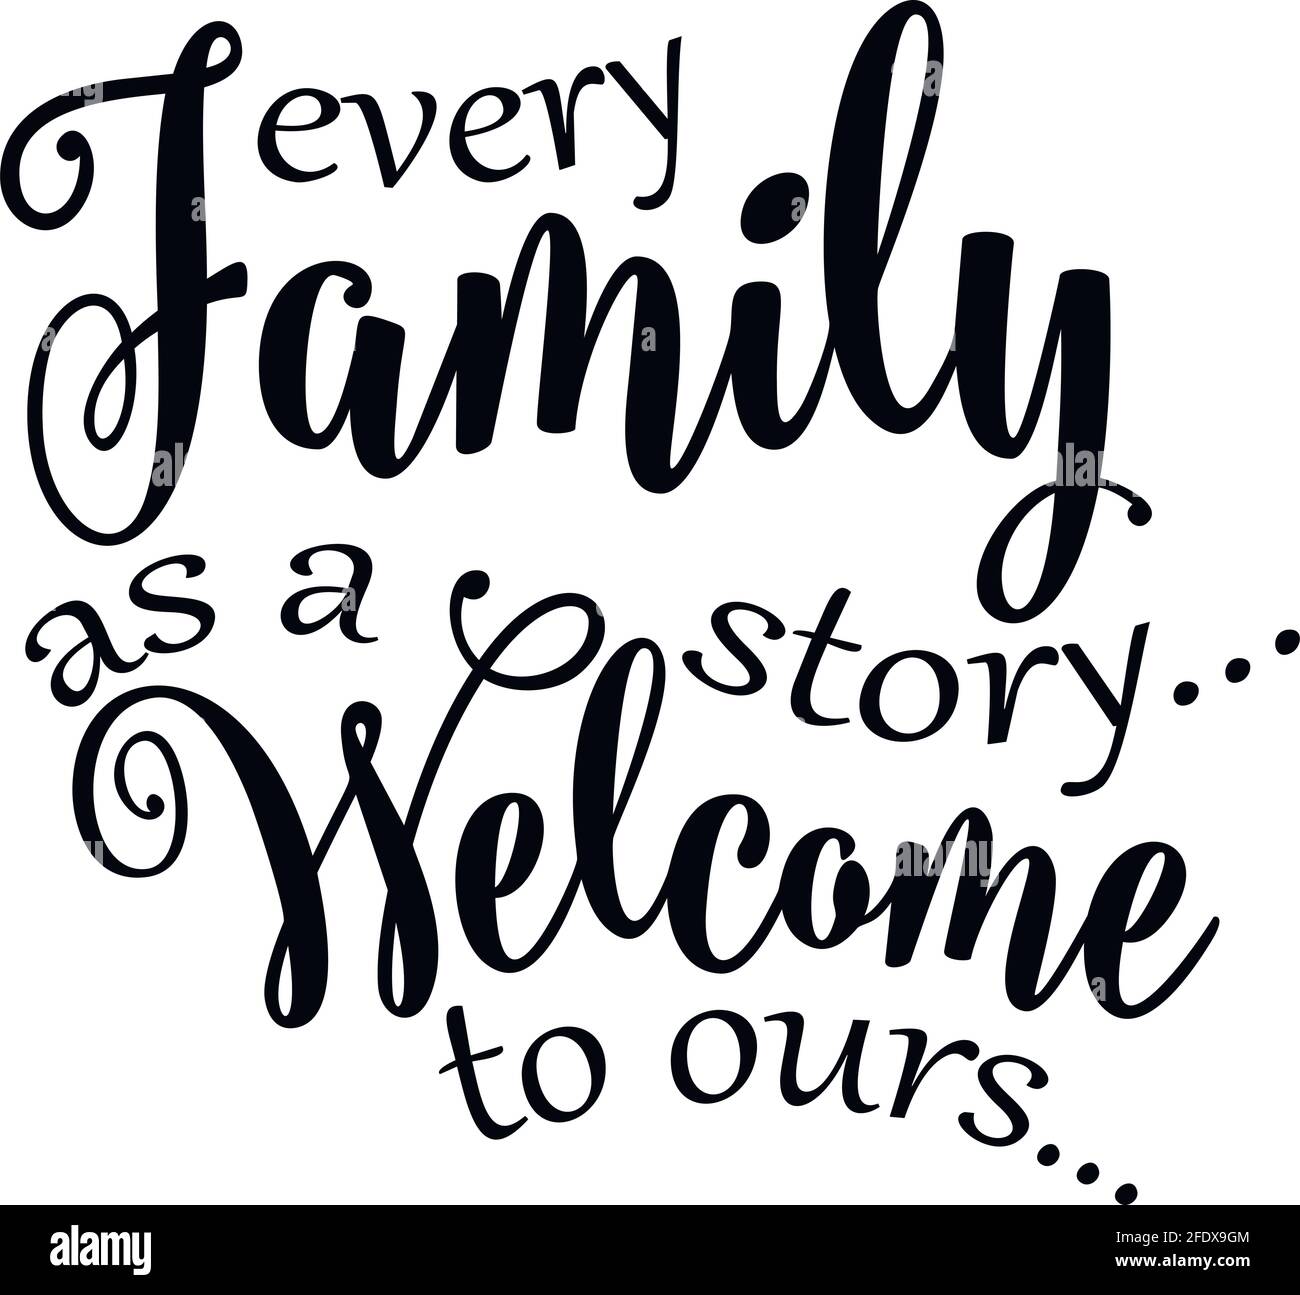 family sayings, family files - Family Quotes, family sign, Home decor Stock Vector